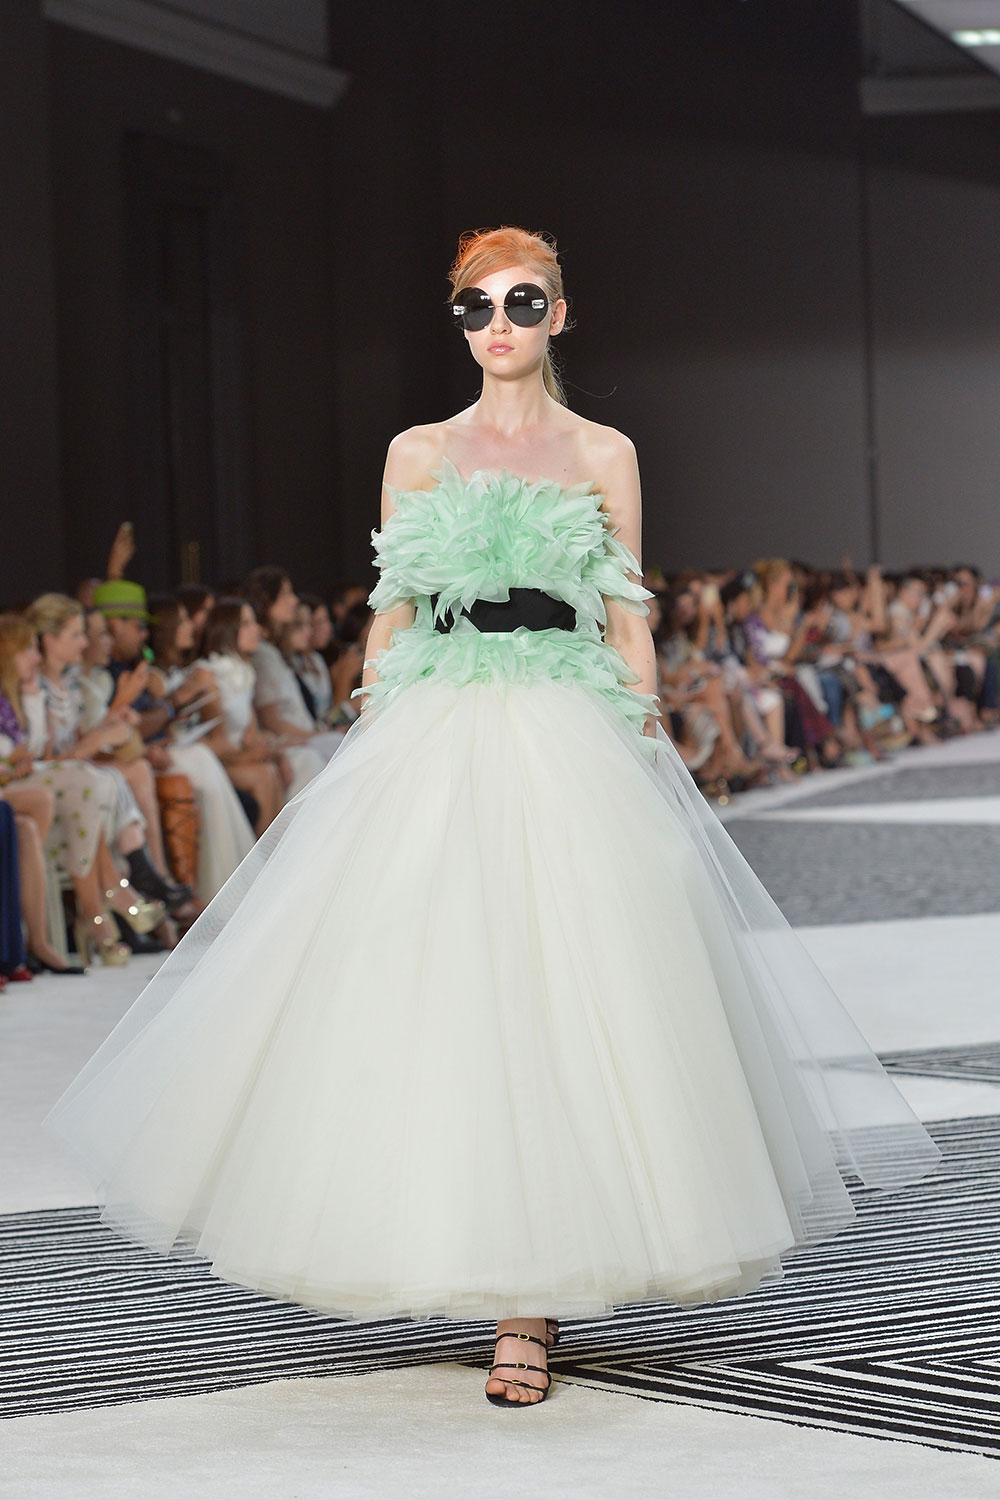 Look 22 from the Giambattista Valli show at Paris Fashion Week Haute Couture FW 2015/2016. Photo / Getty Images